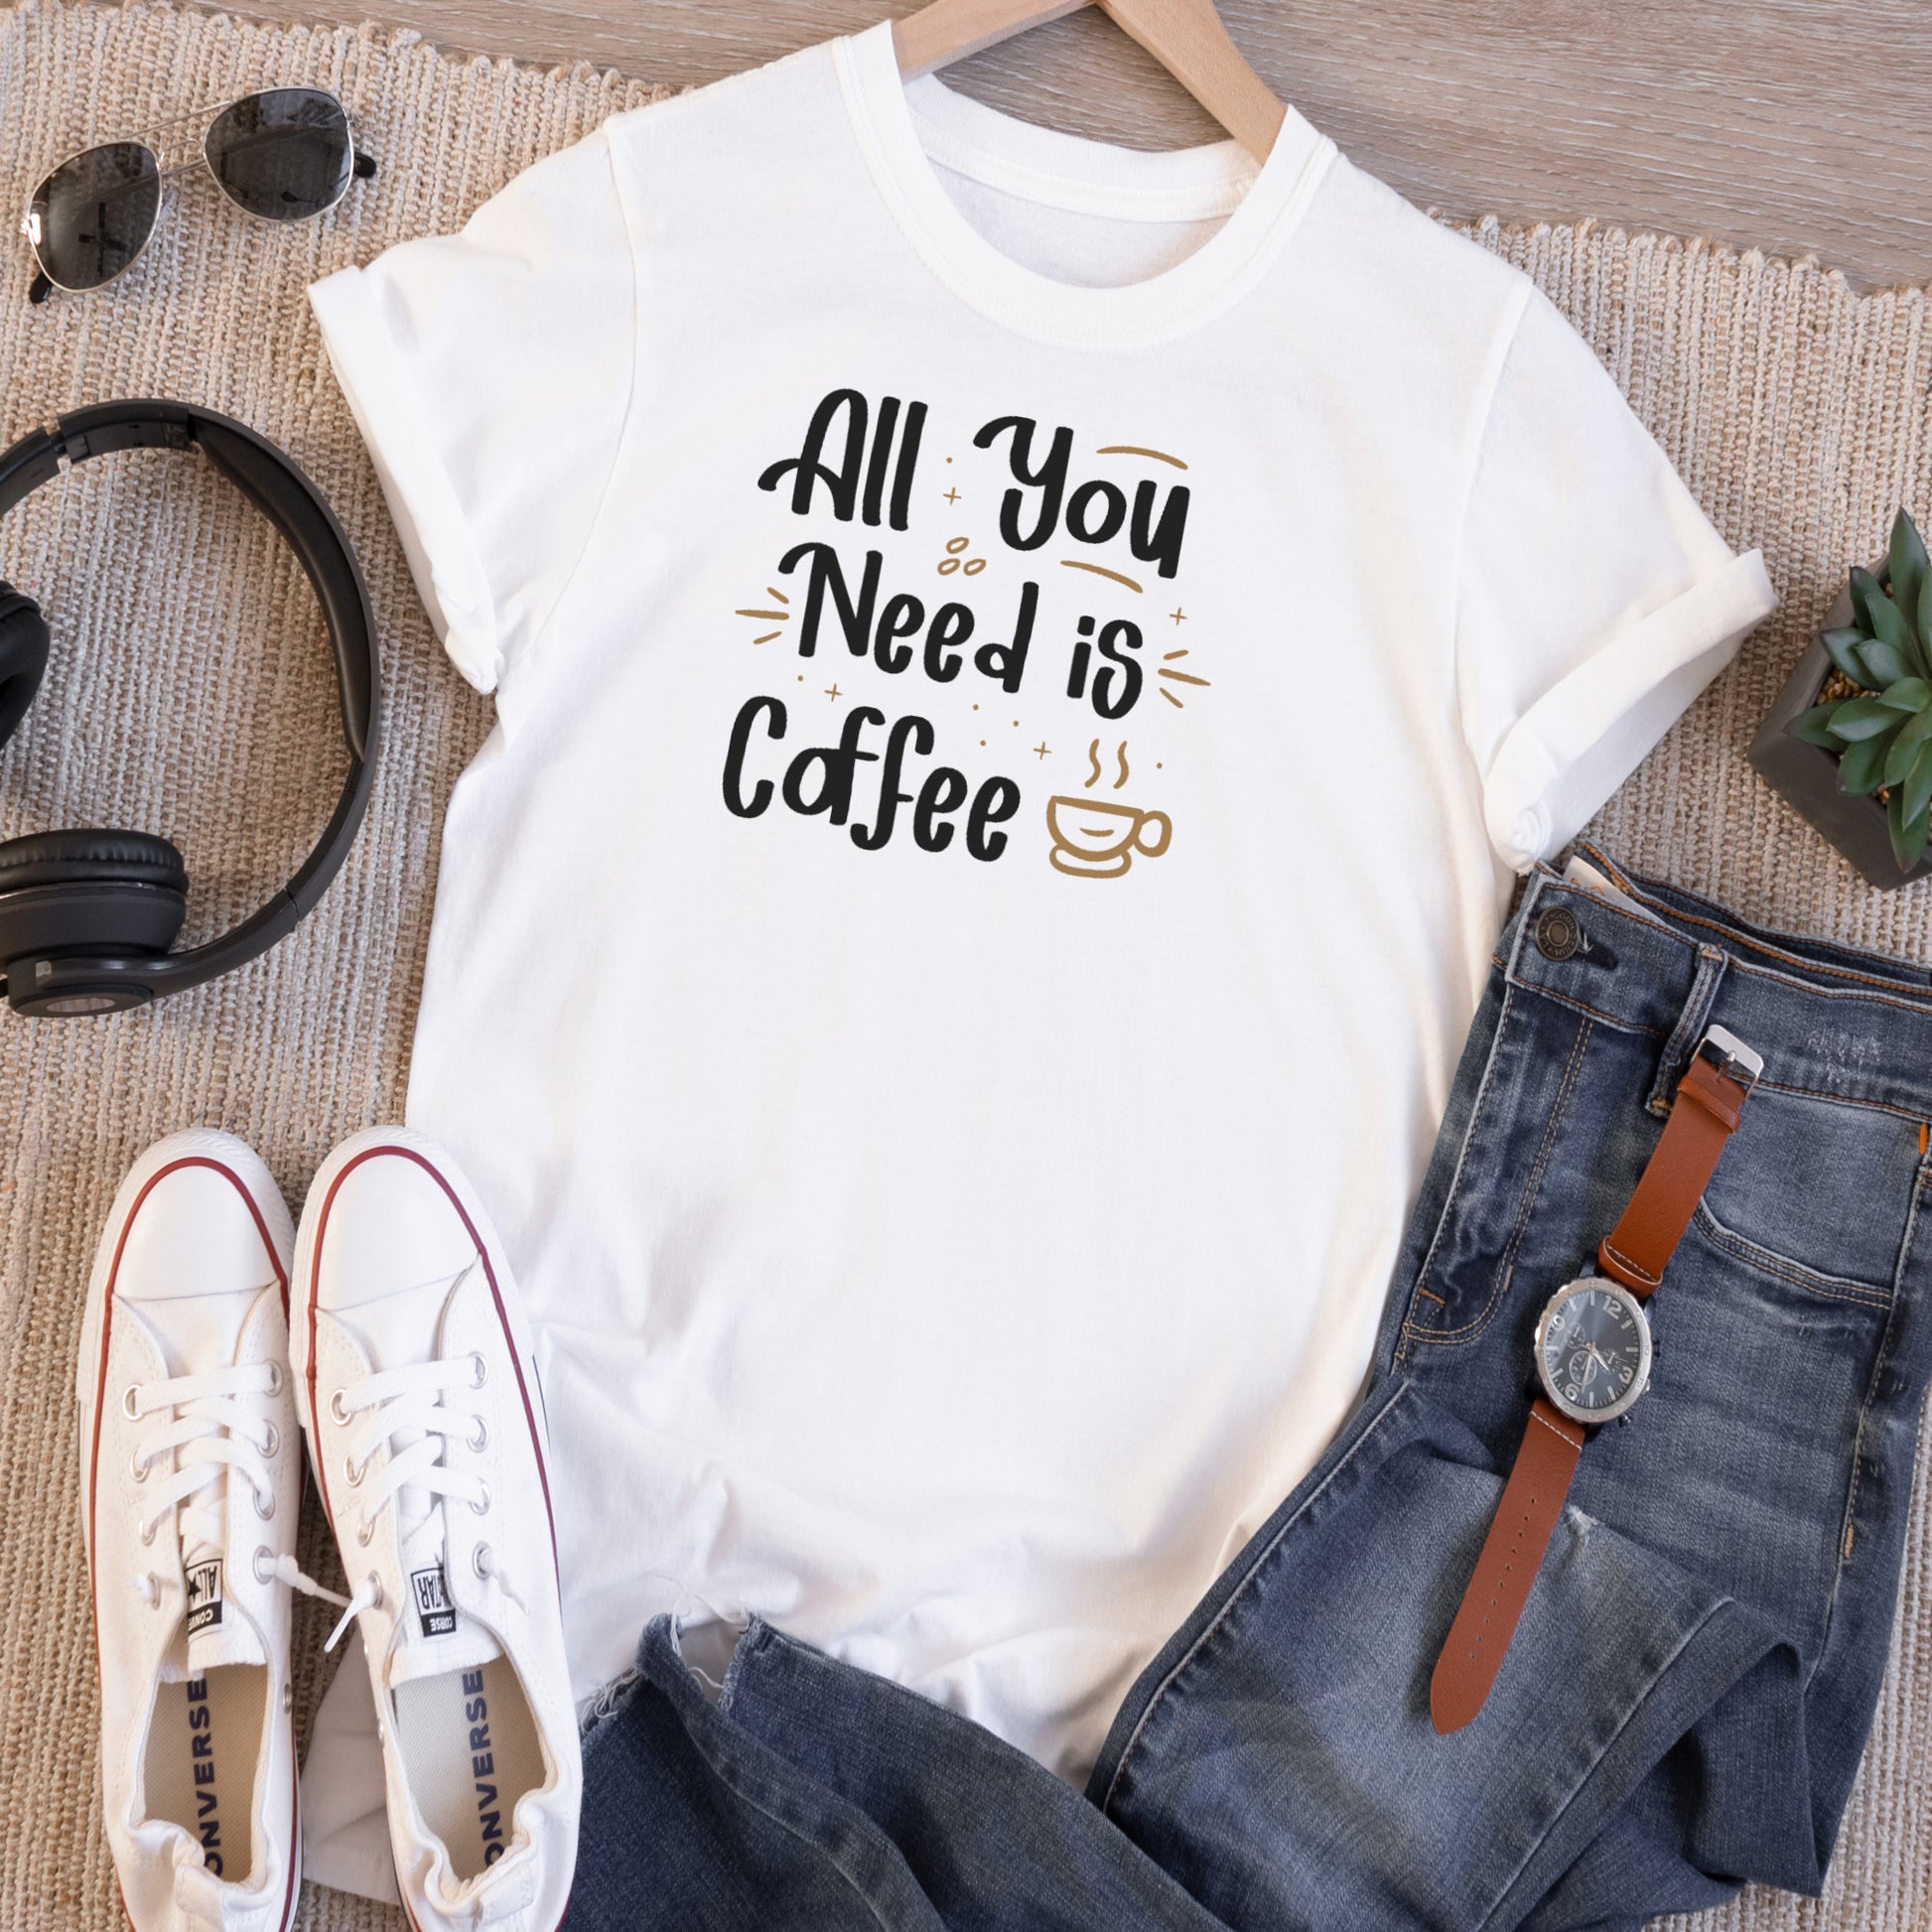 Grit City Rebel White Tshirt with the words All You Need Is Coffee unisex size small to 3X